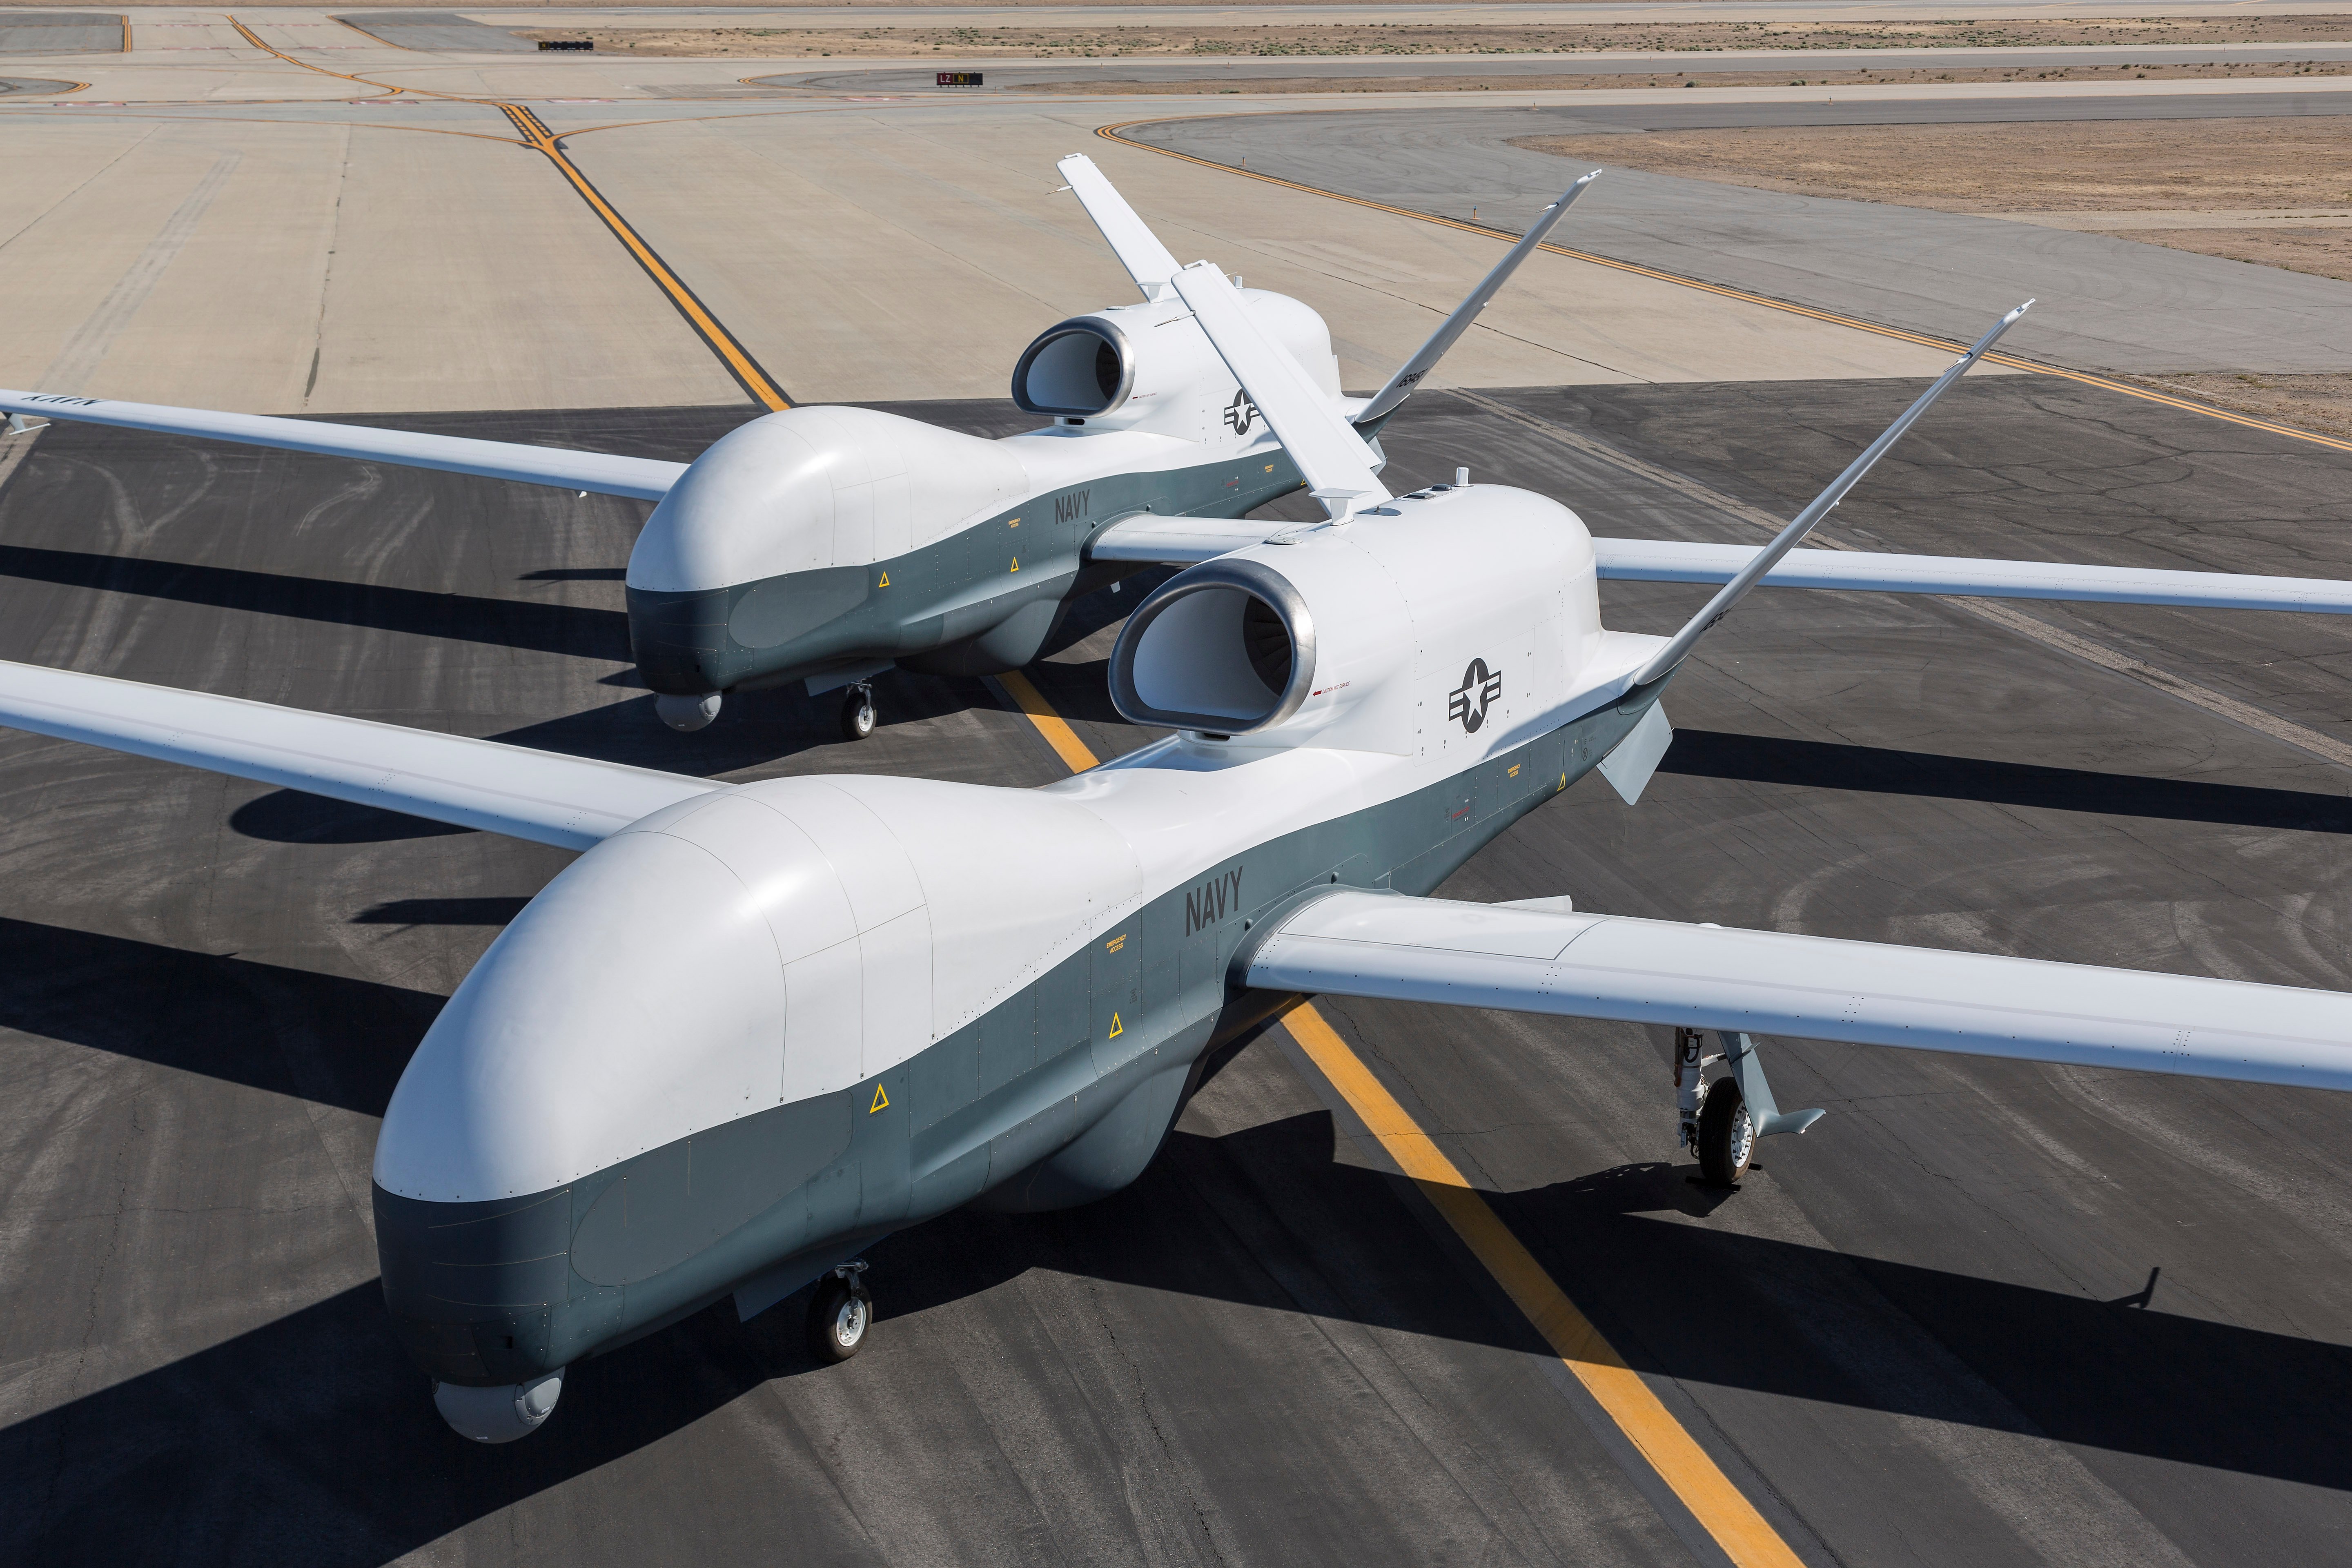 Two Northrop Grumman MQ-4C Triton unmanned aerial vehicles sit on the tarmac at a Northrop Grumman test facility in Palmdale, Calif., in May 2013. US Navy photo.